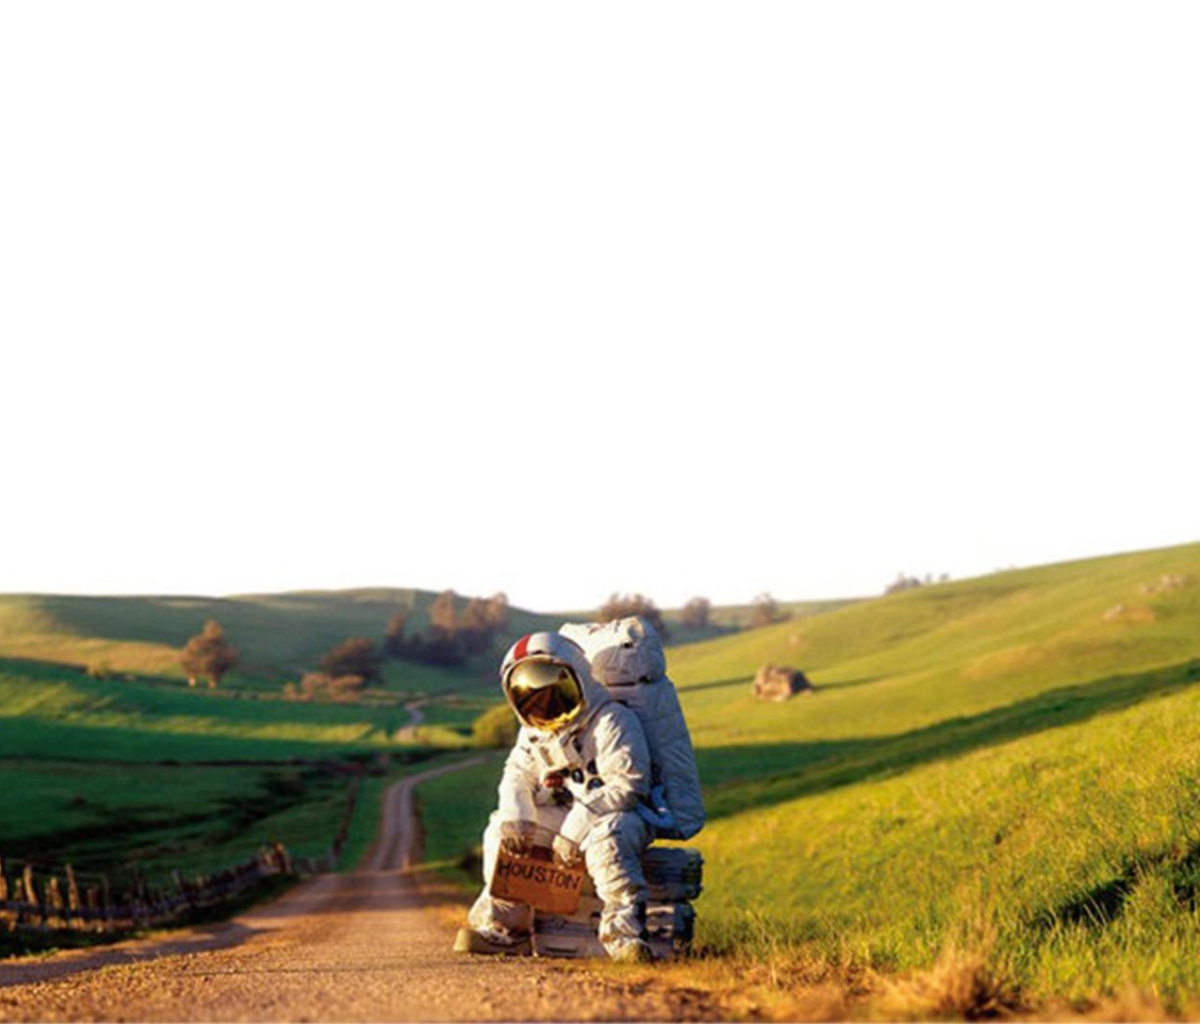 Astronaut On The Road wallpaper 1200x1024